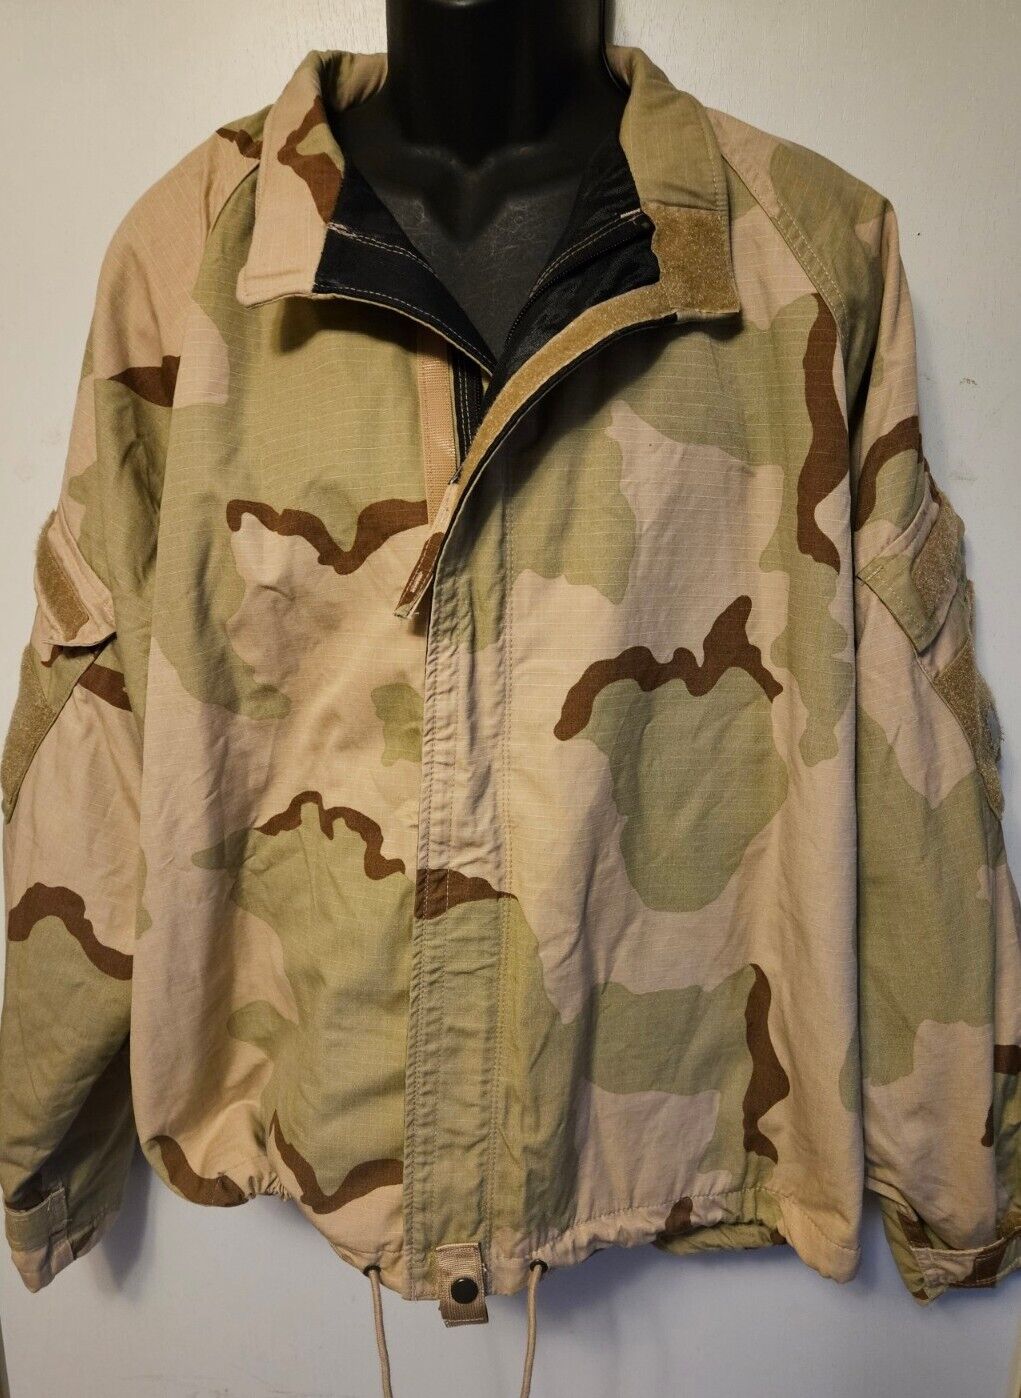 US MILITARY SPECIAL OPERATION FORCES CLS 2 DESERT CAMO LARGE LONG OVERGARMENT